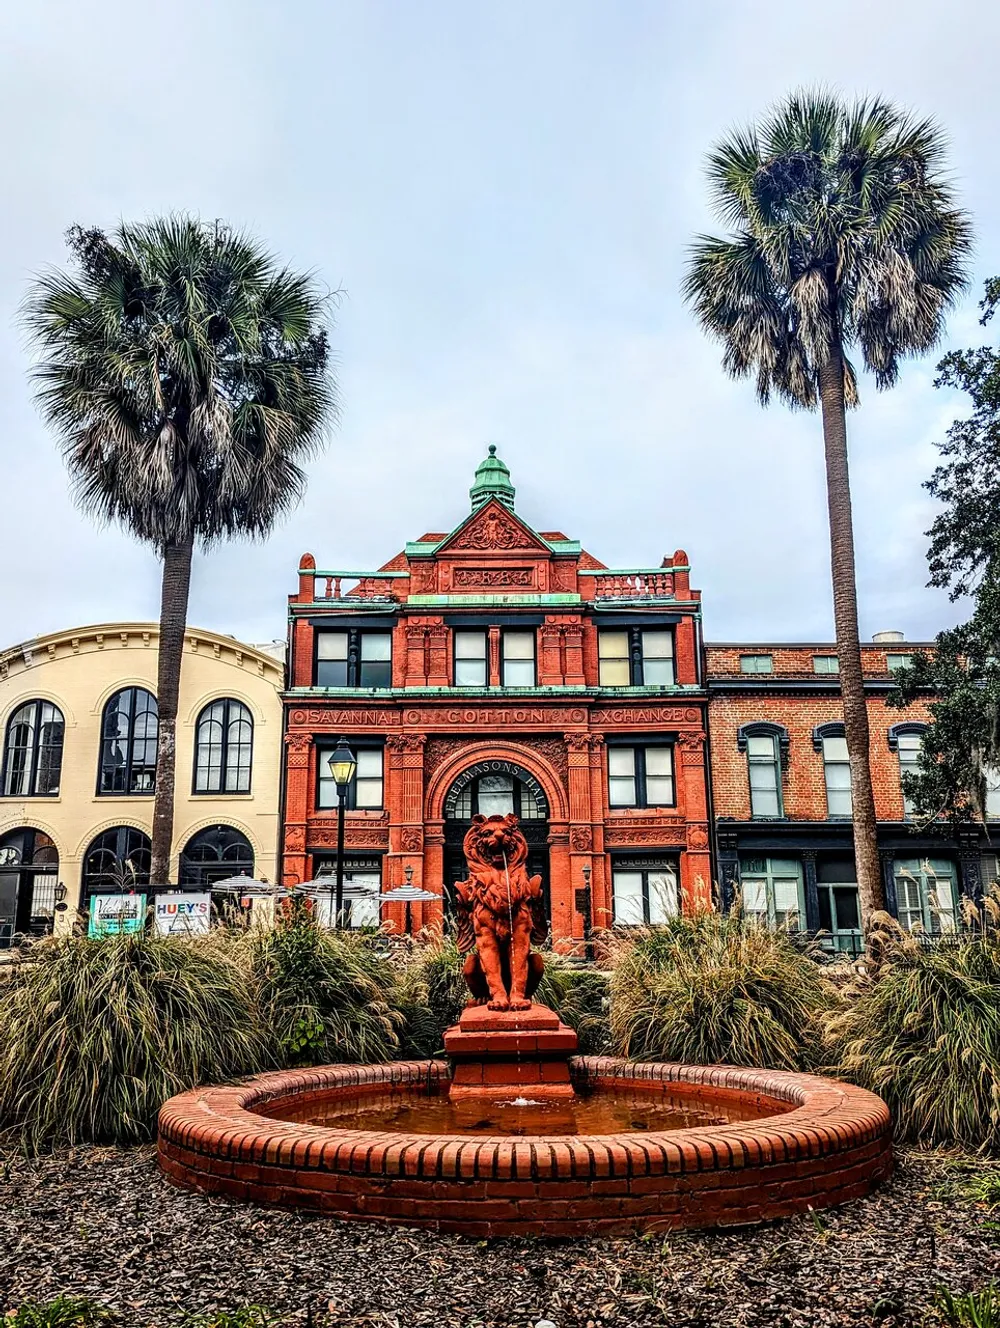 The image shows a picturesque view of a historic red brick building with the inscription Savannah Cotton Exchange framed by palm trees and a fountain with a lion statue in the foreground